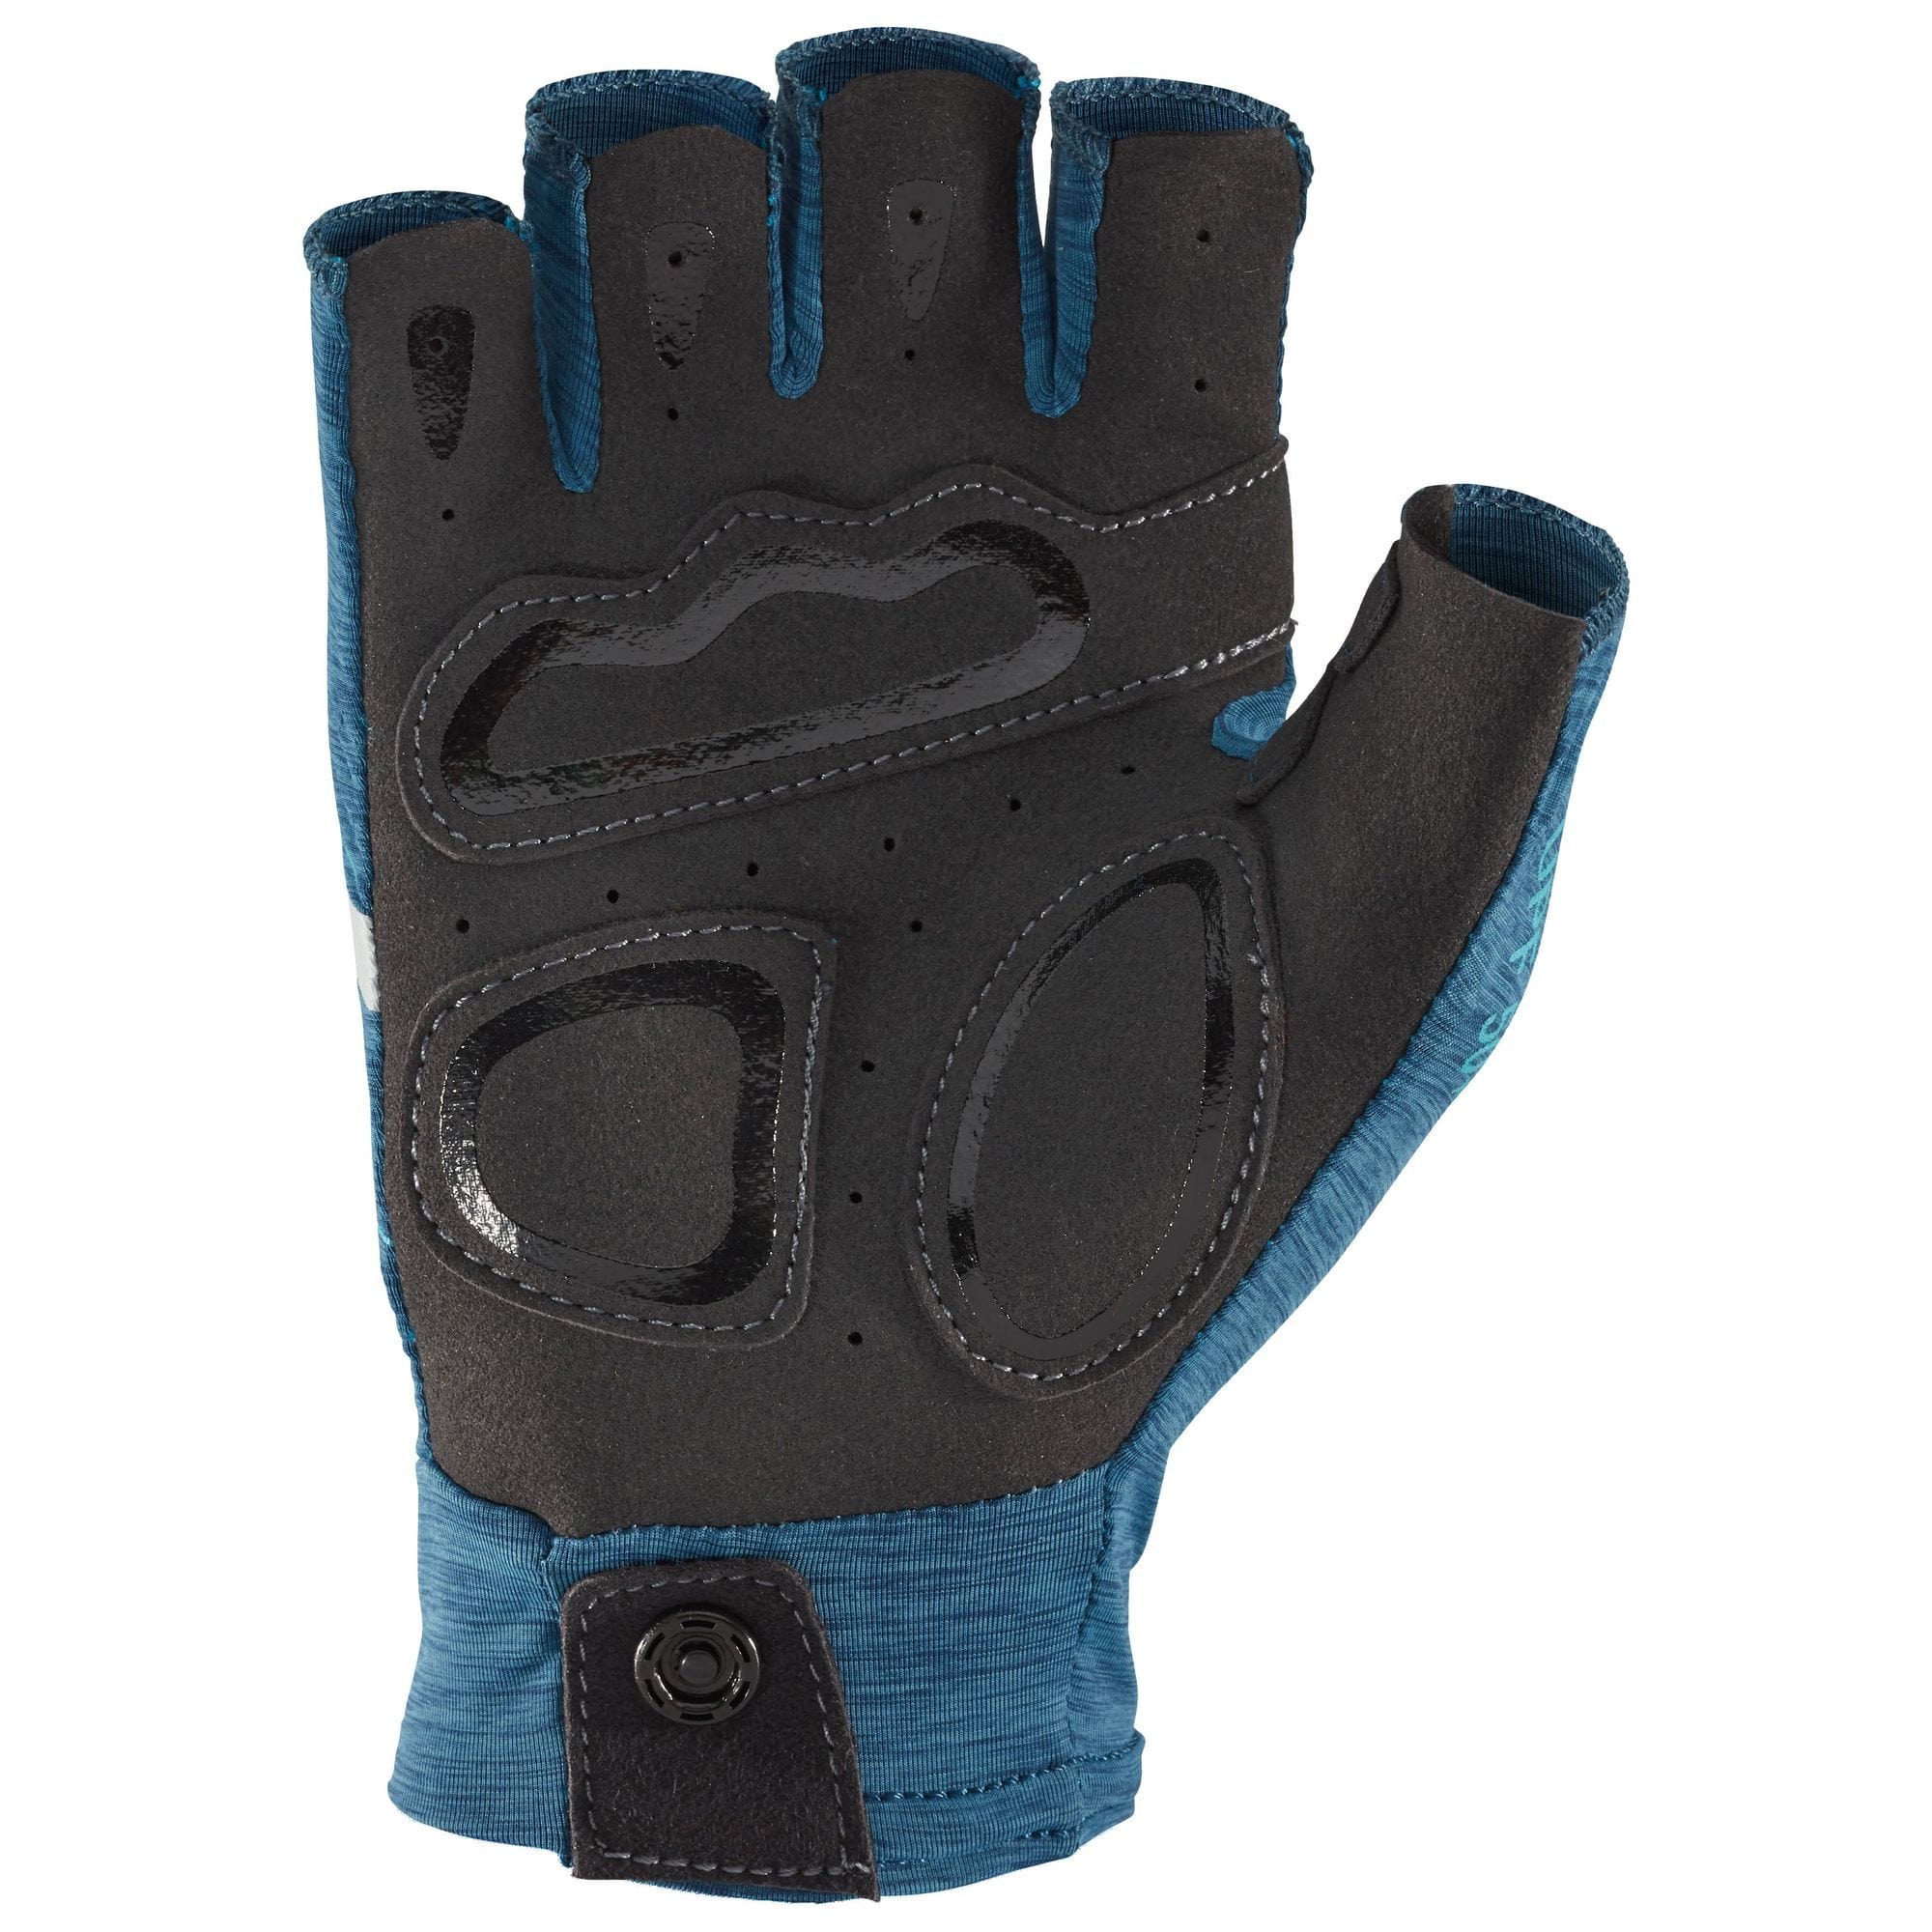 2021 NRS Men's Boater's Glove Closeout